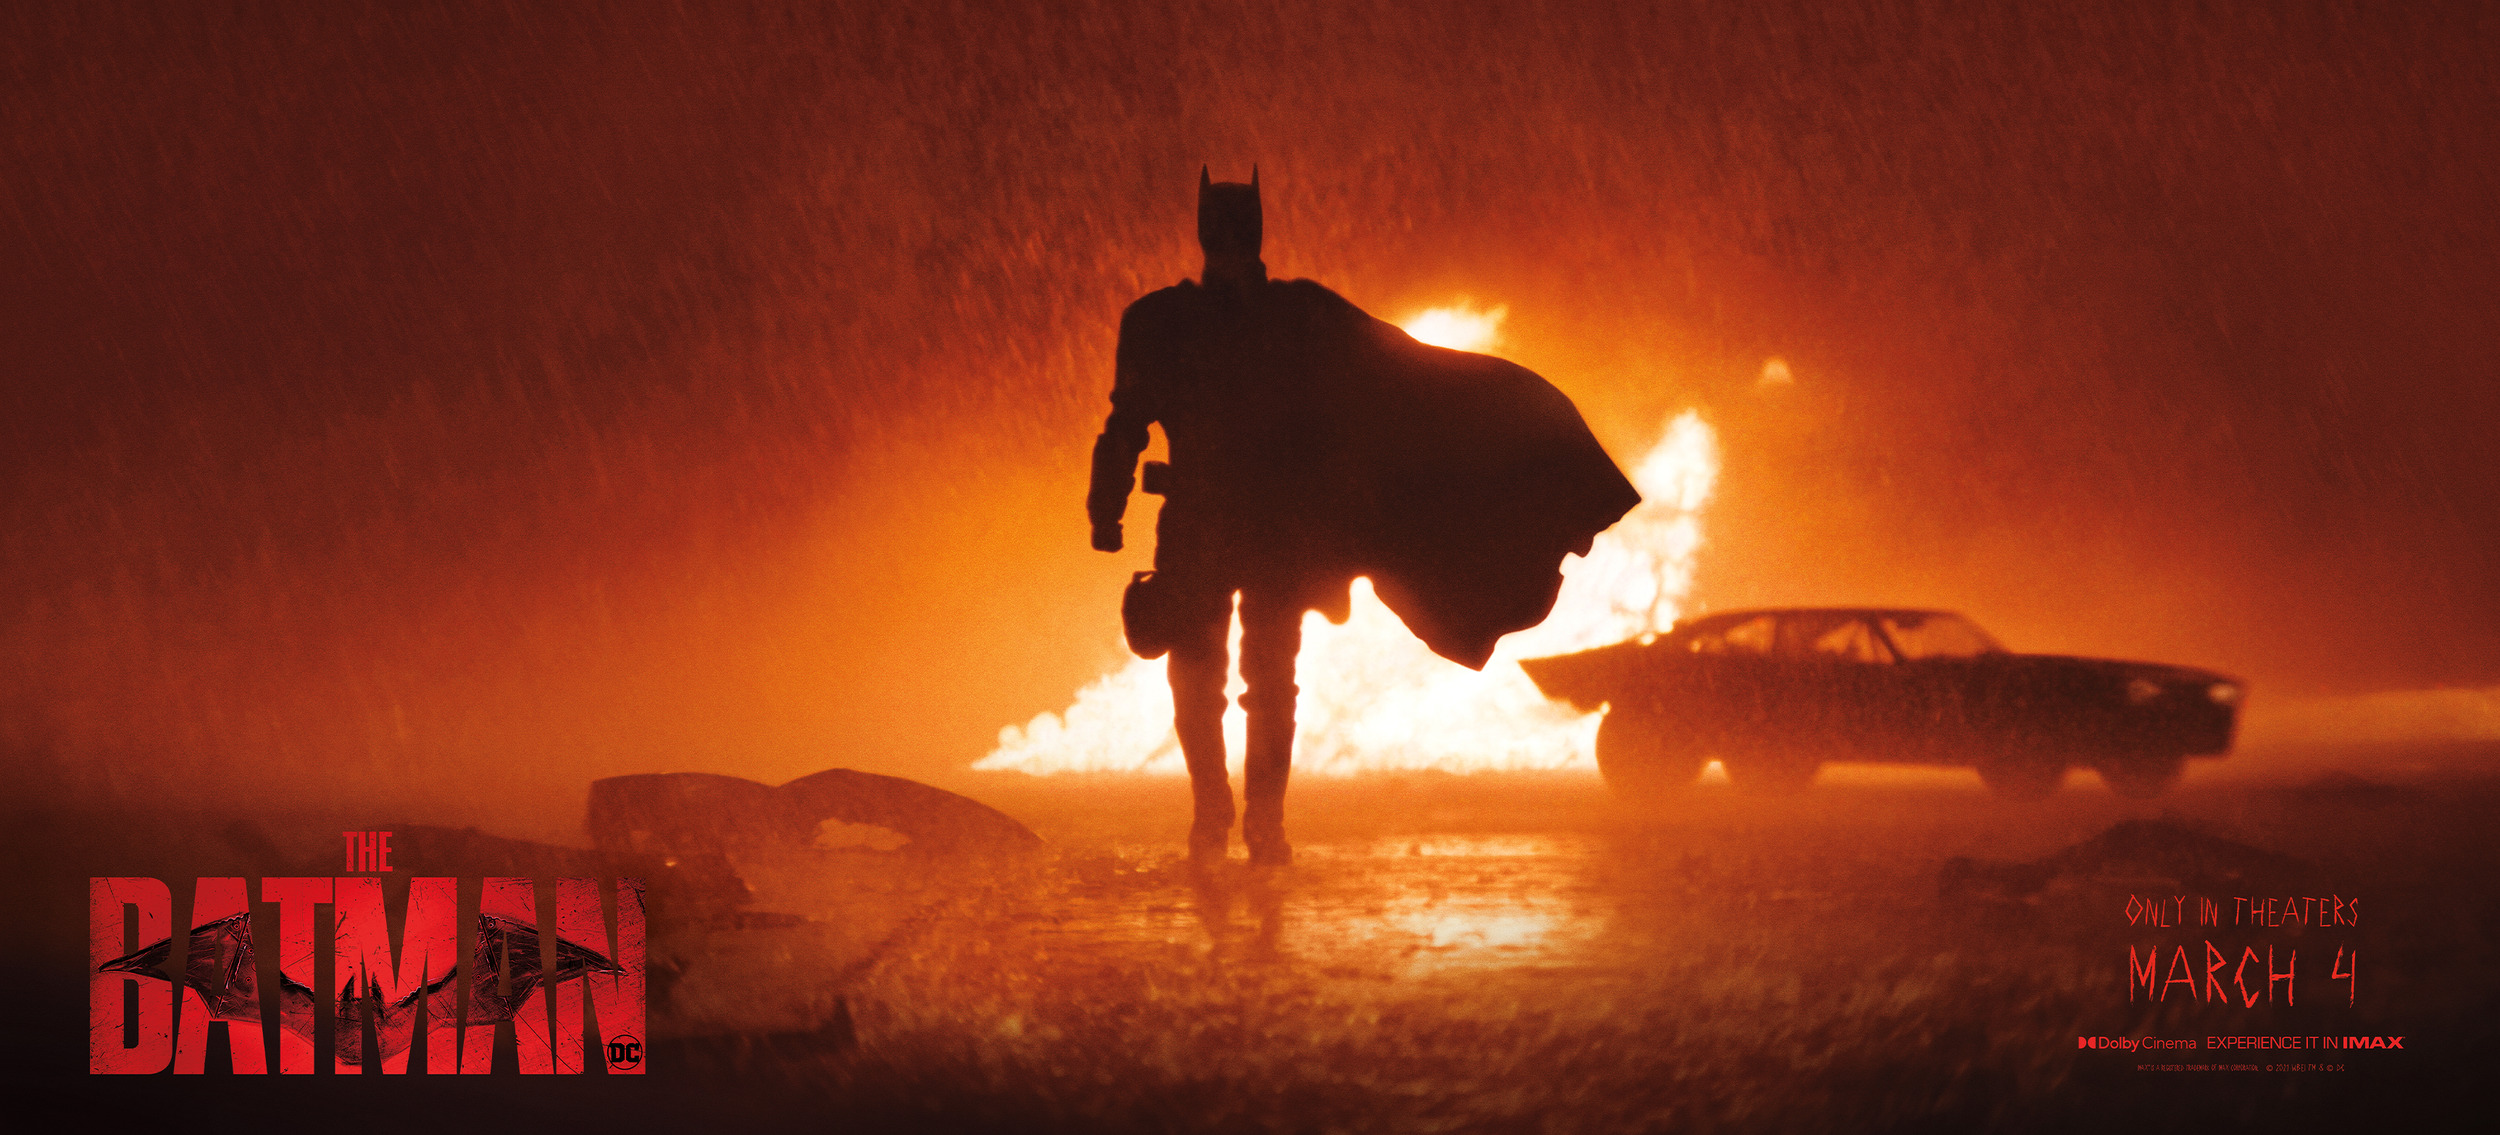 Mega Sized Movie Poster Image for The Batman (#10 of 32)